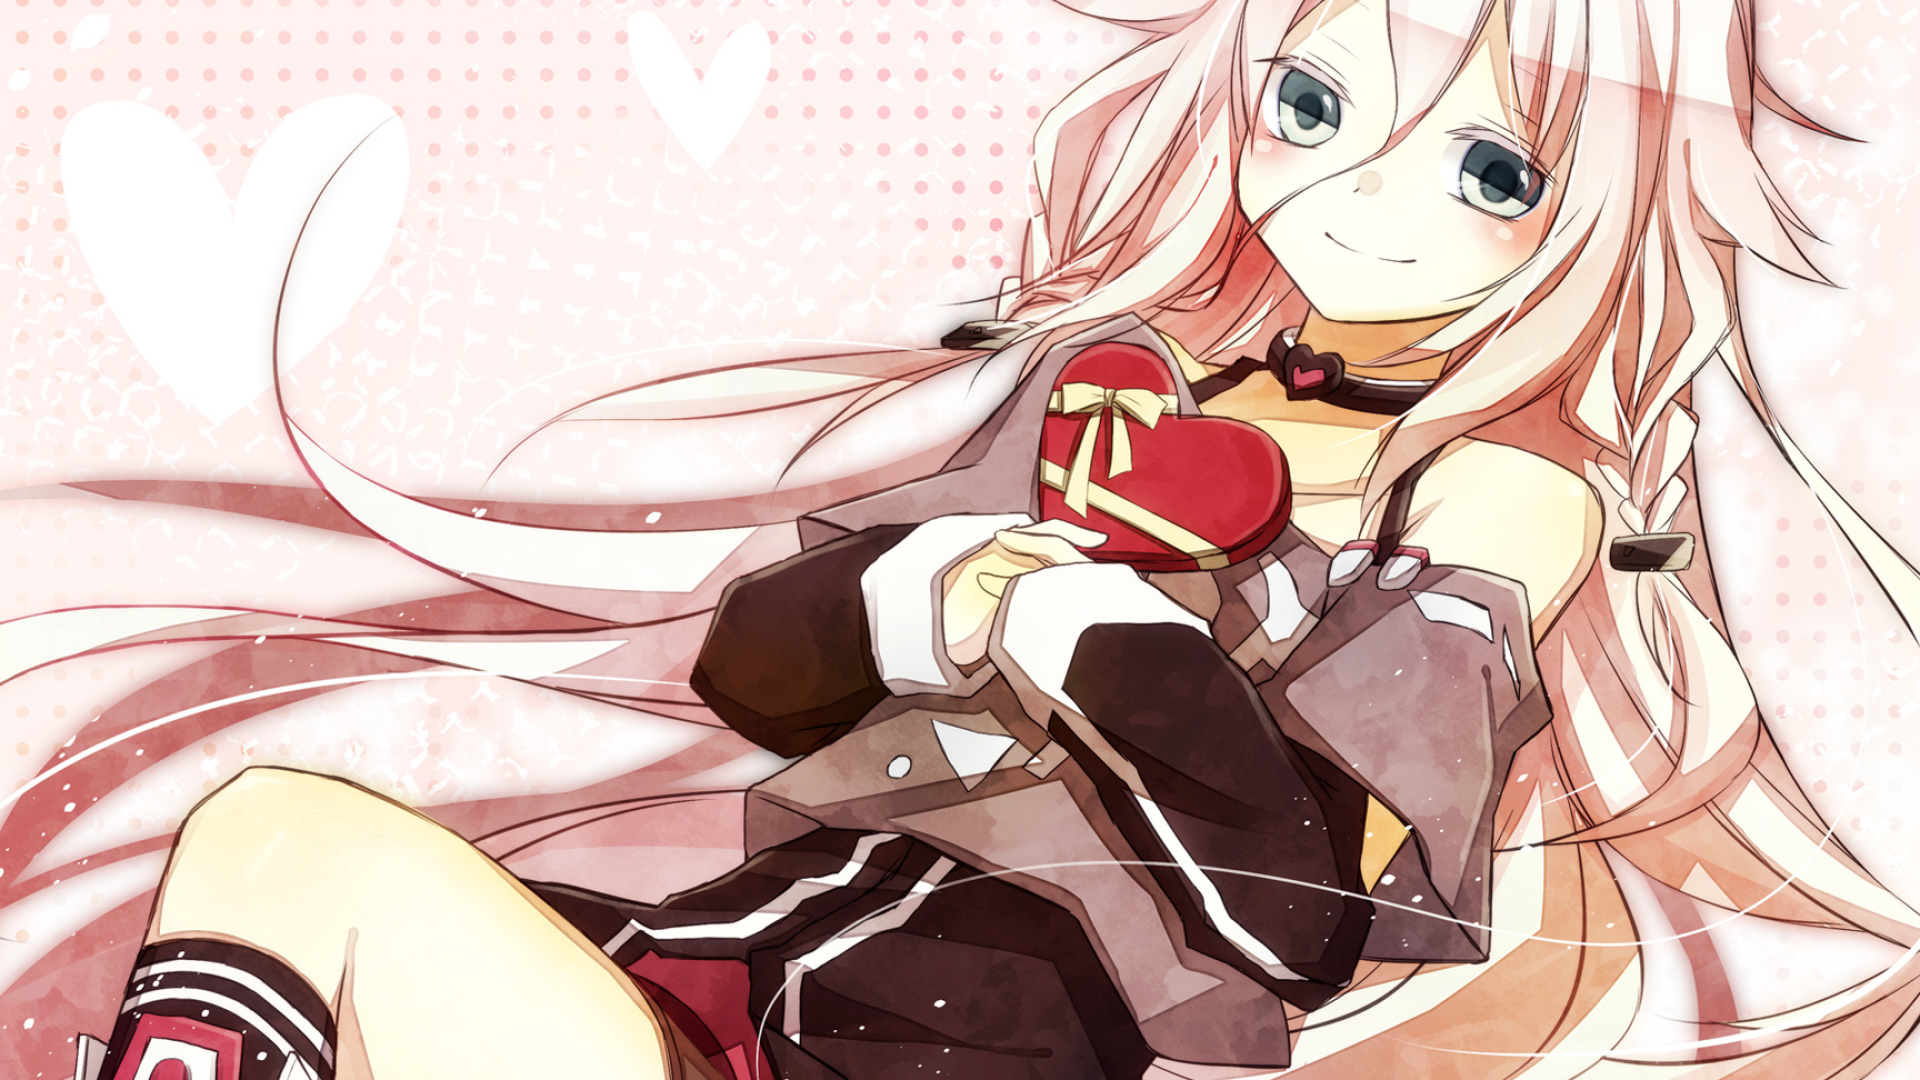 IA Vocaloid, High-definition wallpaper, Anime-inspired character, Captivating visuals, 1920x1080 Full HD Desktop